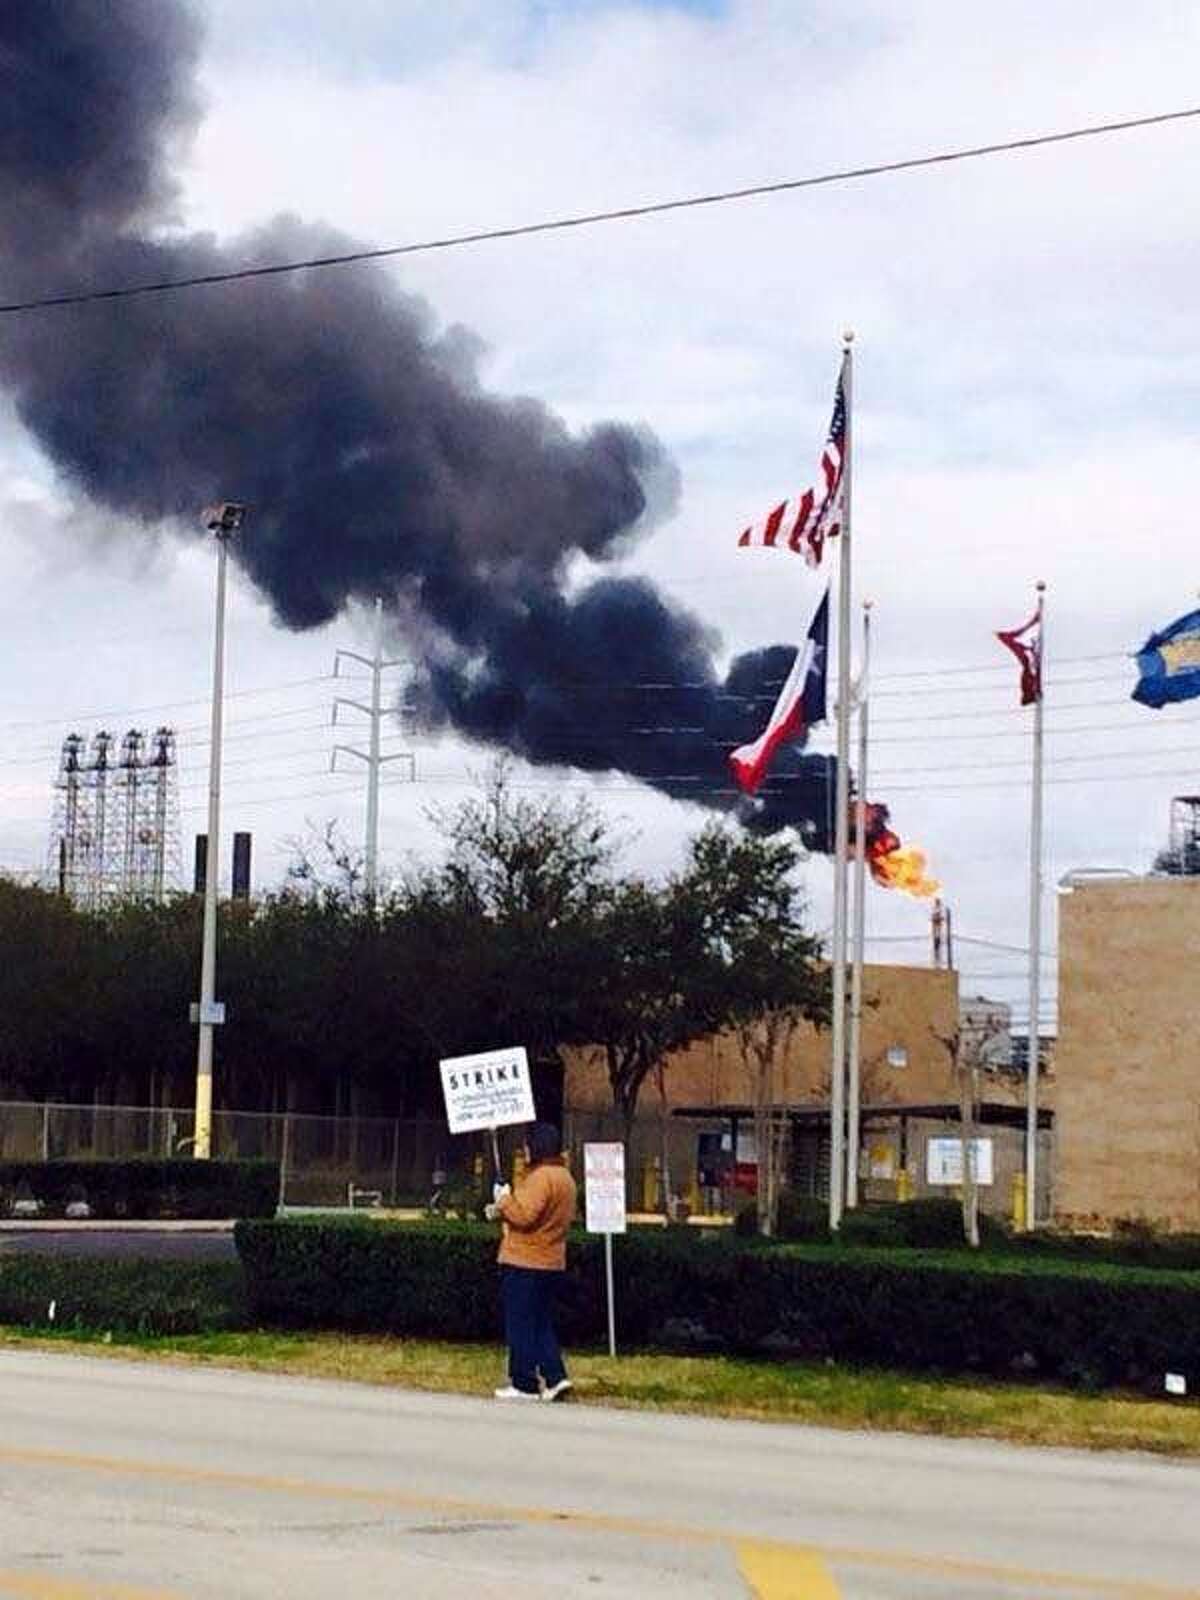 In a photo provided by striking steelworker Juan Almanza, black smoke from a flaring stack rises behind a picketer at LyondellBasell's Houston refinery on Feb. 17, 2015. Strikers say the flare illustrates safety concerns that are among issues in the labor negotiations, but LyondellBasell spokesman George Smalley characterized the incident as a "brief upset" resulting from a tripped compressor at a refining facility called a delayed coker unit. He said the situation did not become an emergency, safety systems functioned as designed and the flare burned off associated gas until the compressor resumed operations about 30 minutes later.